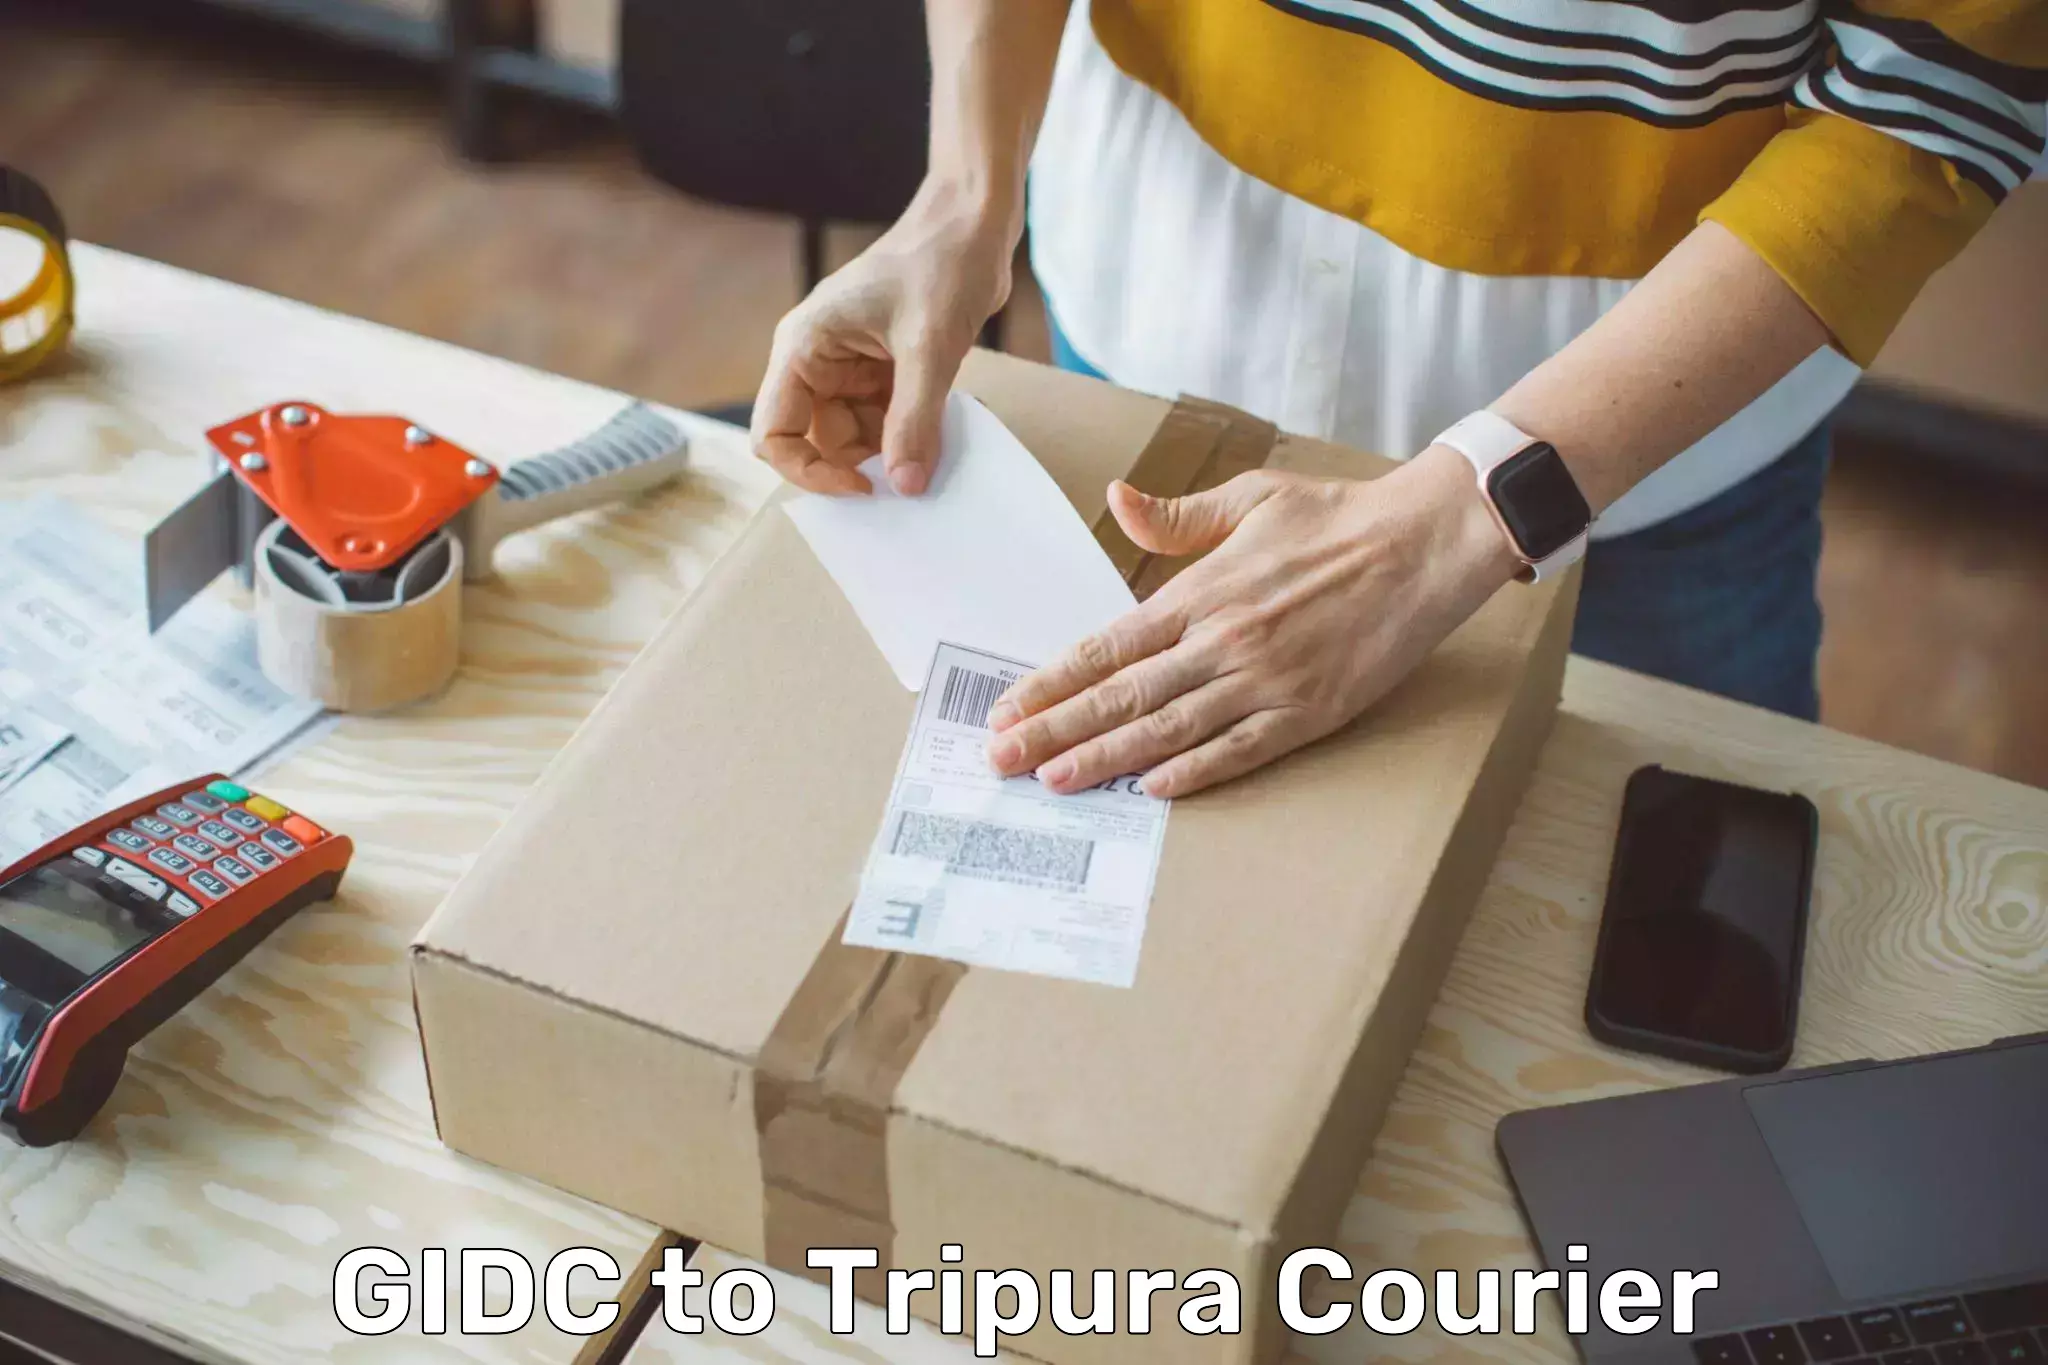 Local delivery service GIDC to West Tripura